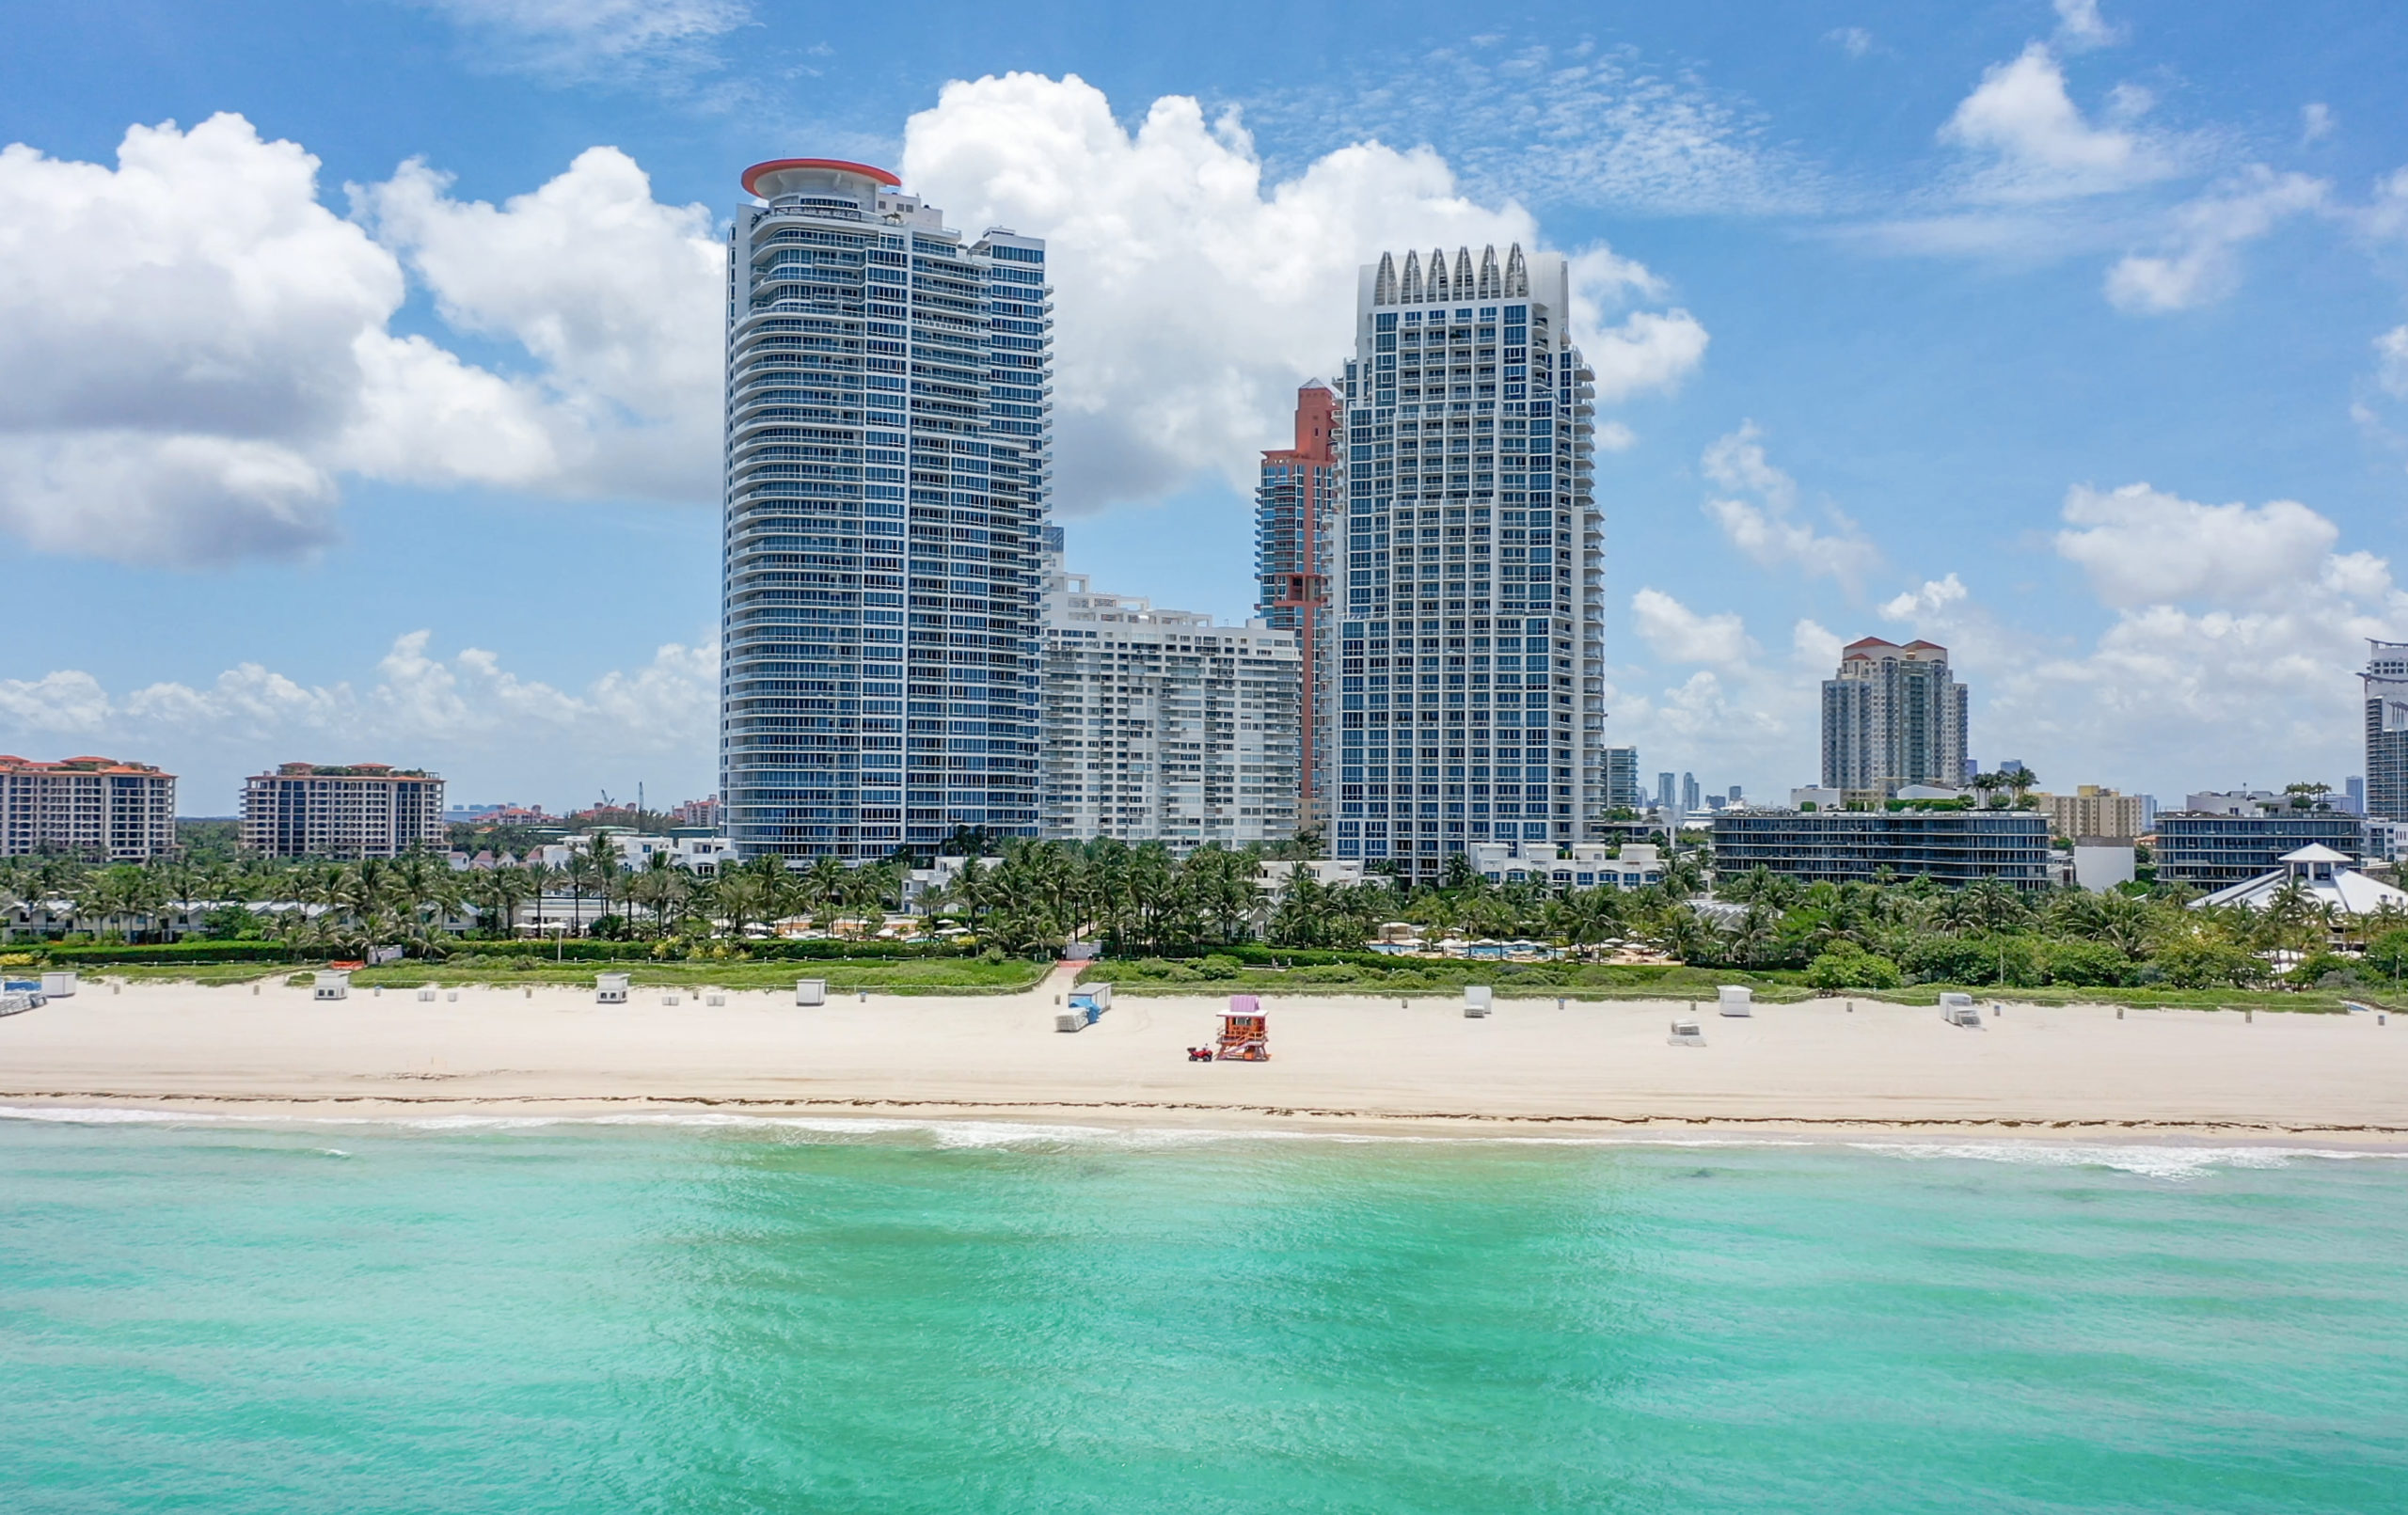 2020 is a Buyer’s Market | What are the Best Deals at Continuum on South Beach?